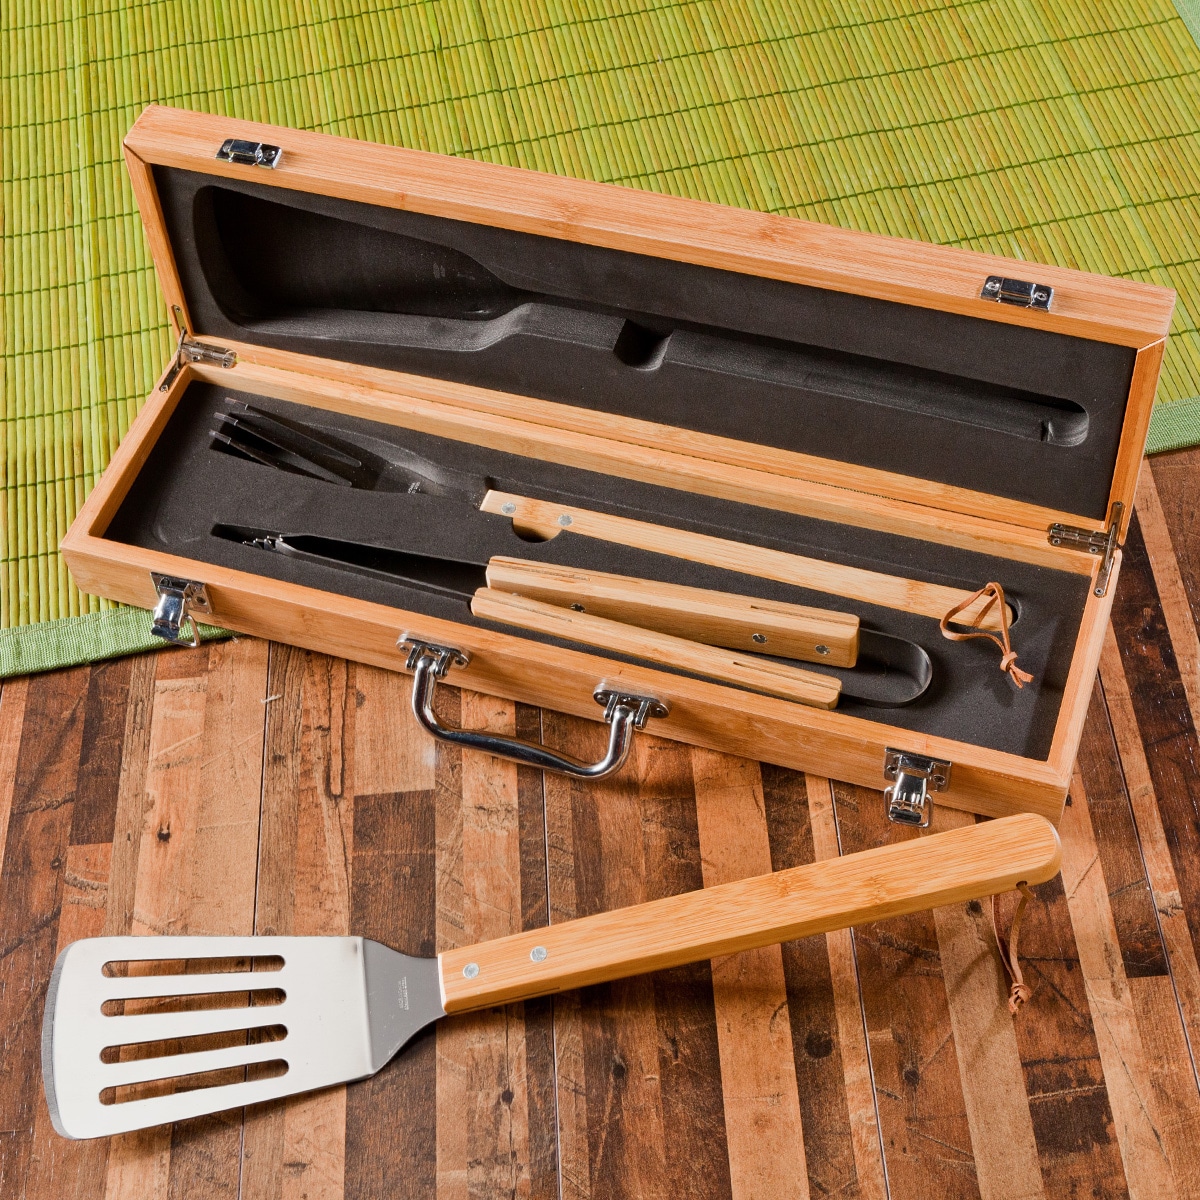 GC1334 BBQ Set with Included Grill Tools